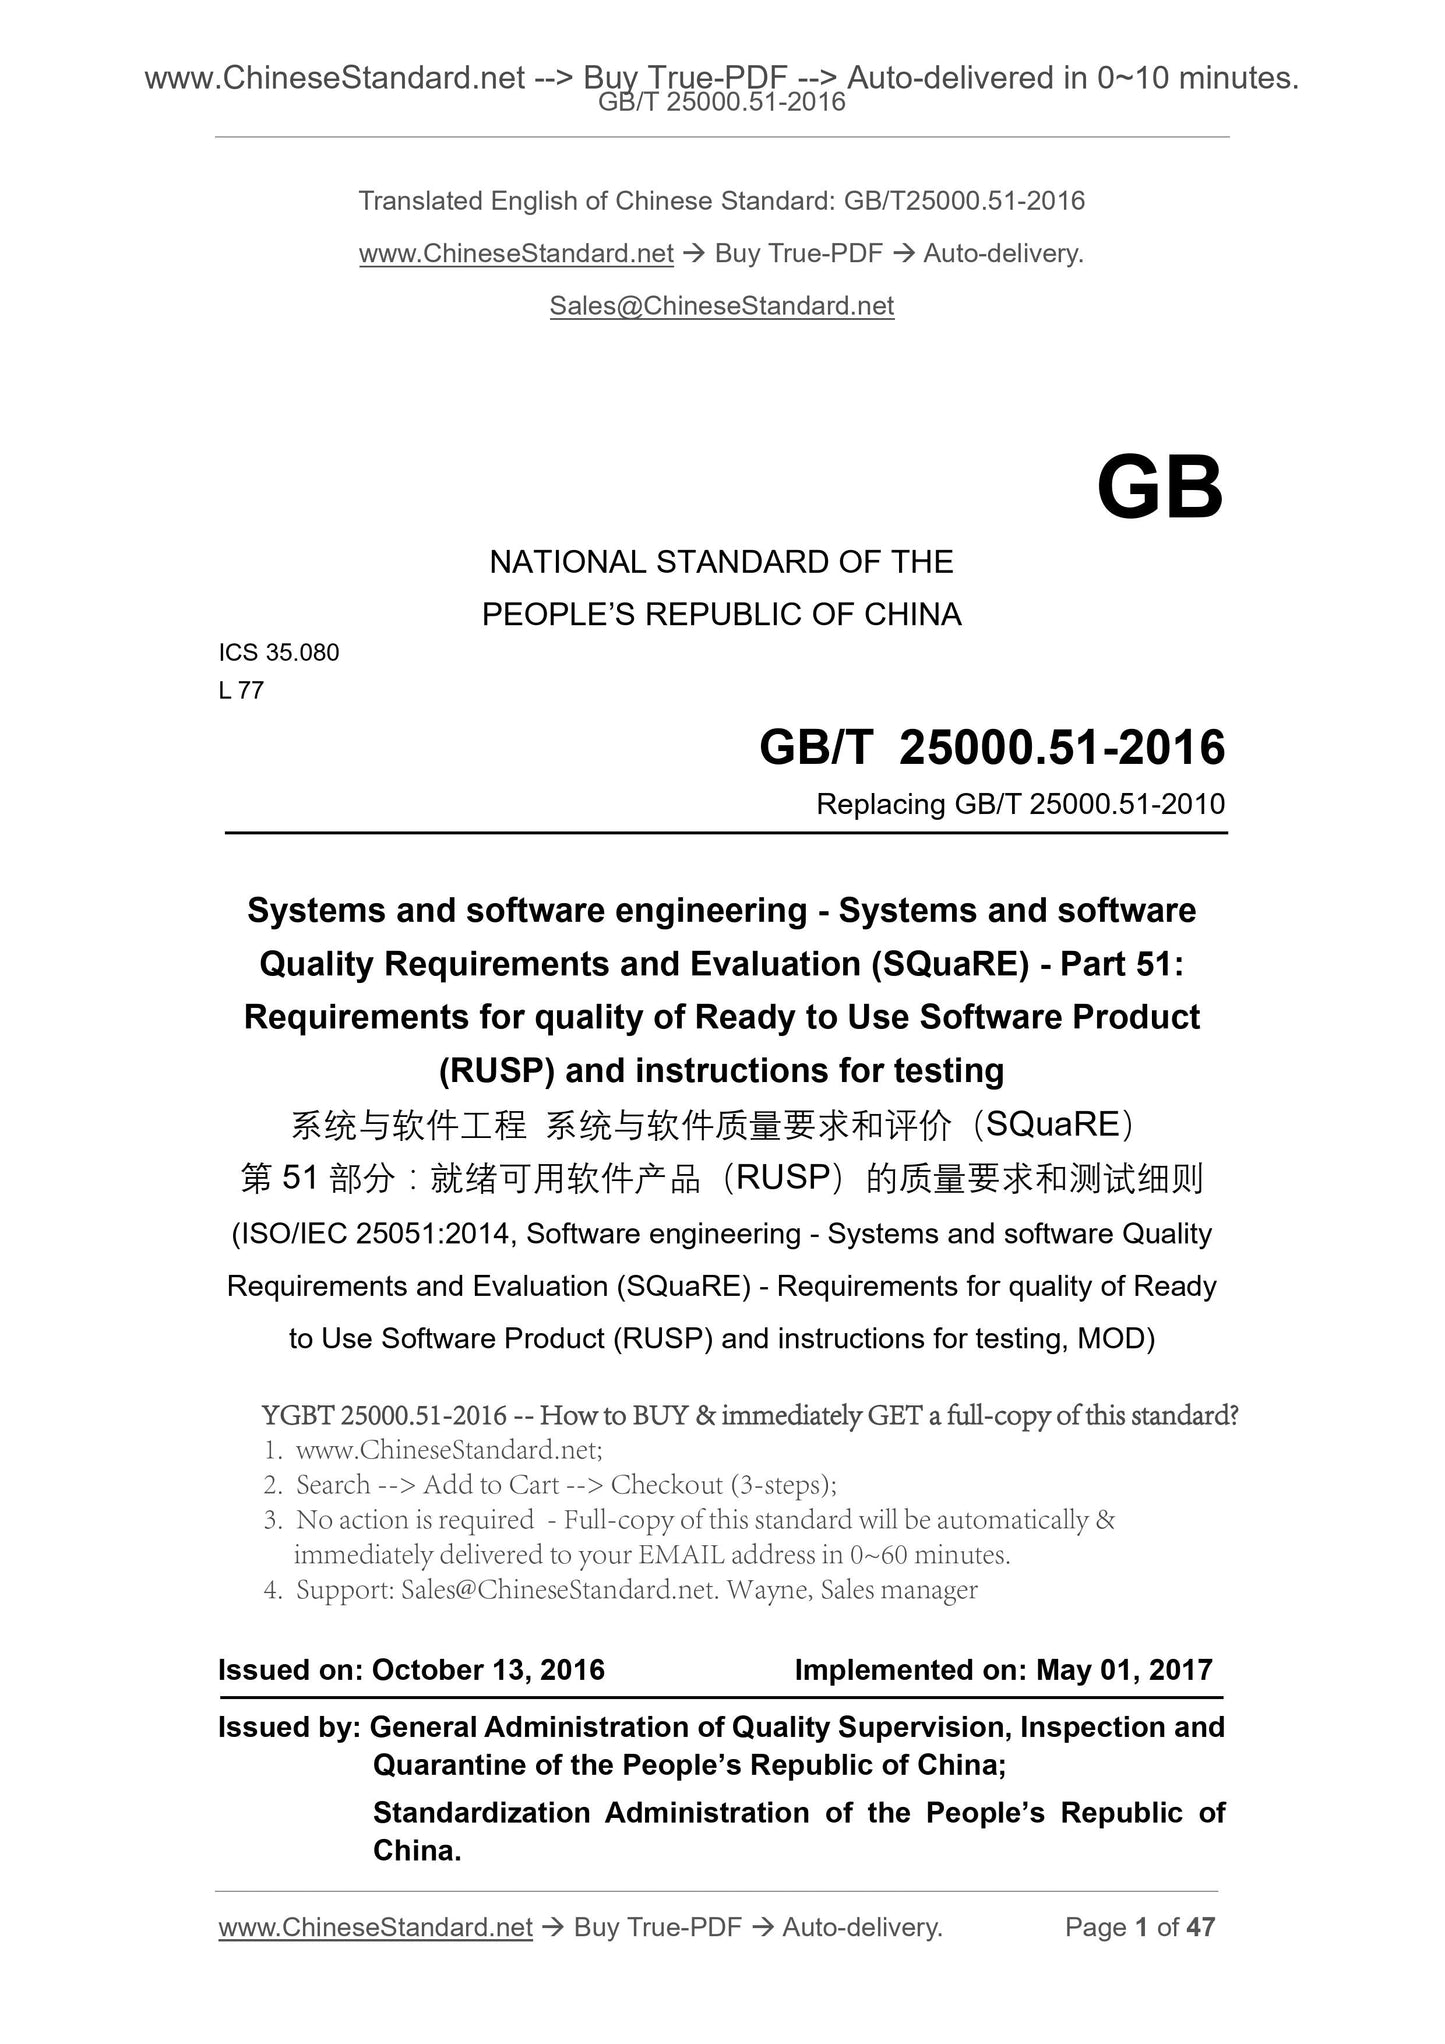 GB/T 25000.51-2016 Page 1